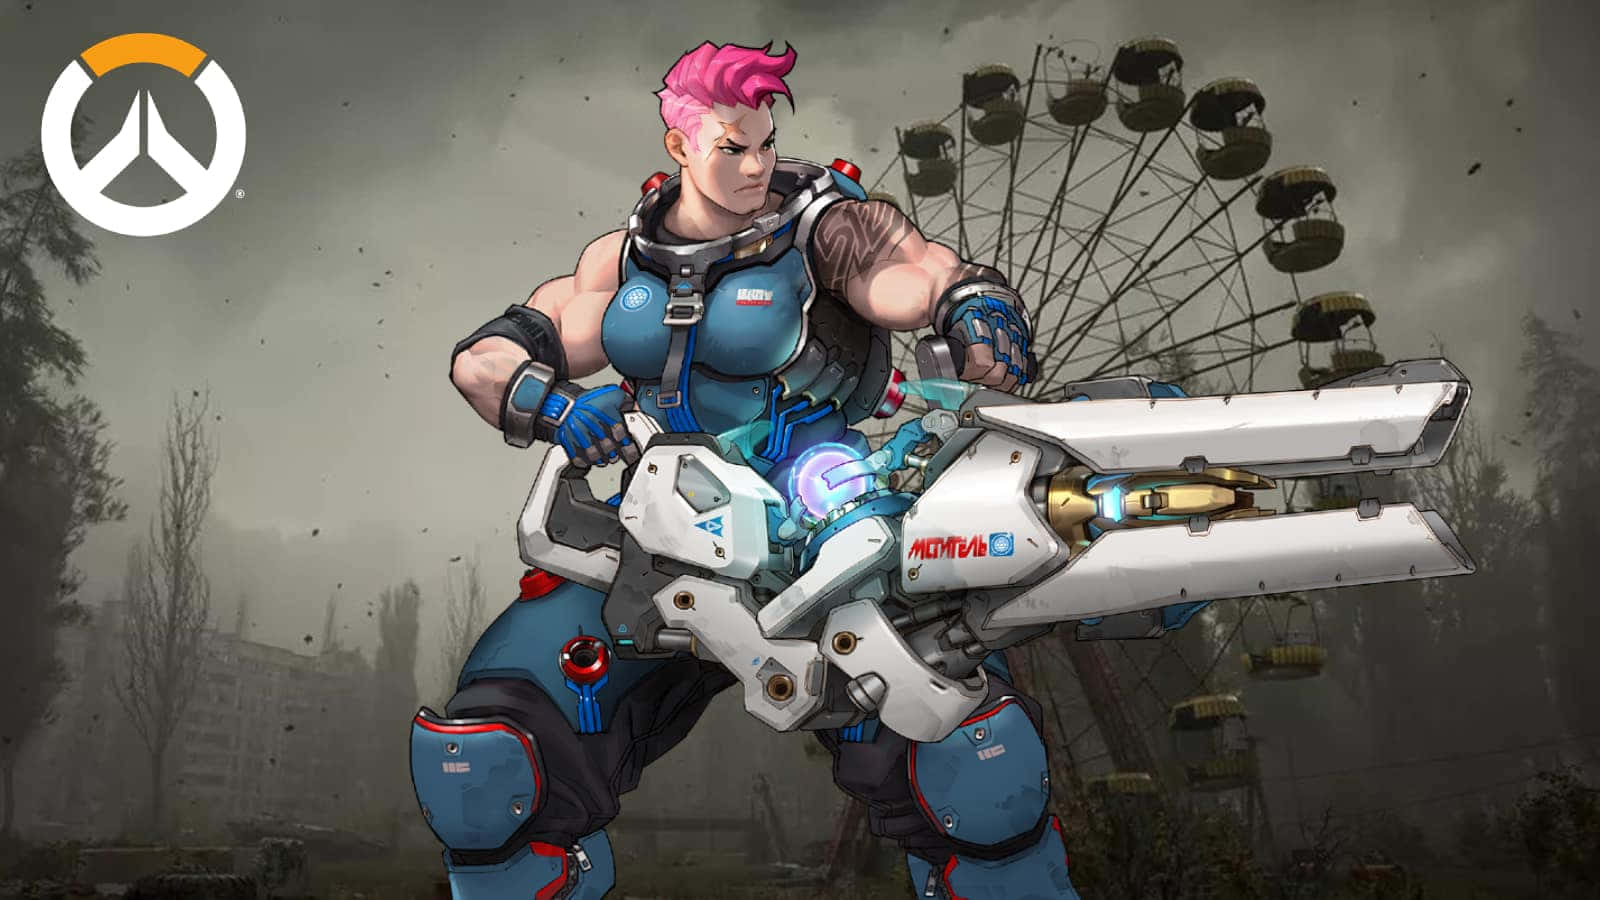 Strong and Determined - Zarya from Overwatch in action Wallpaper